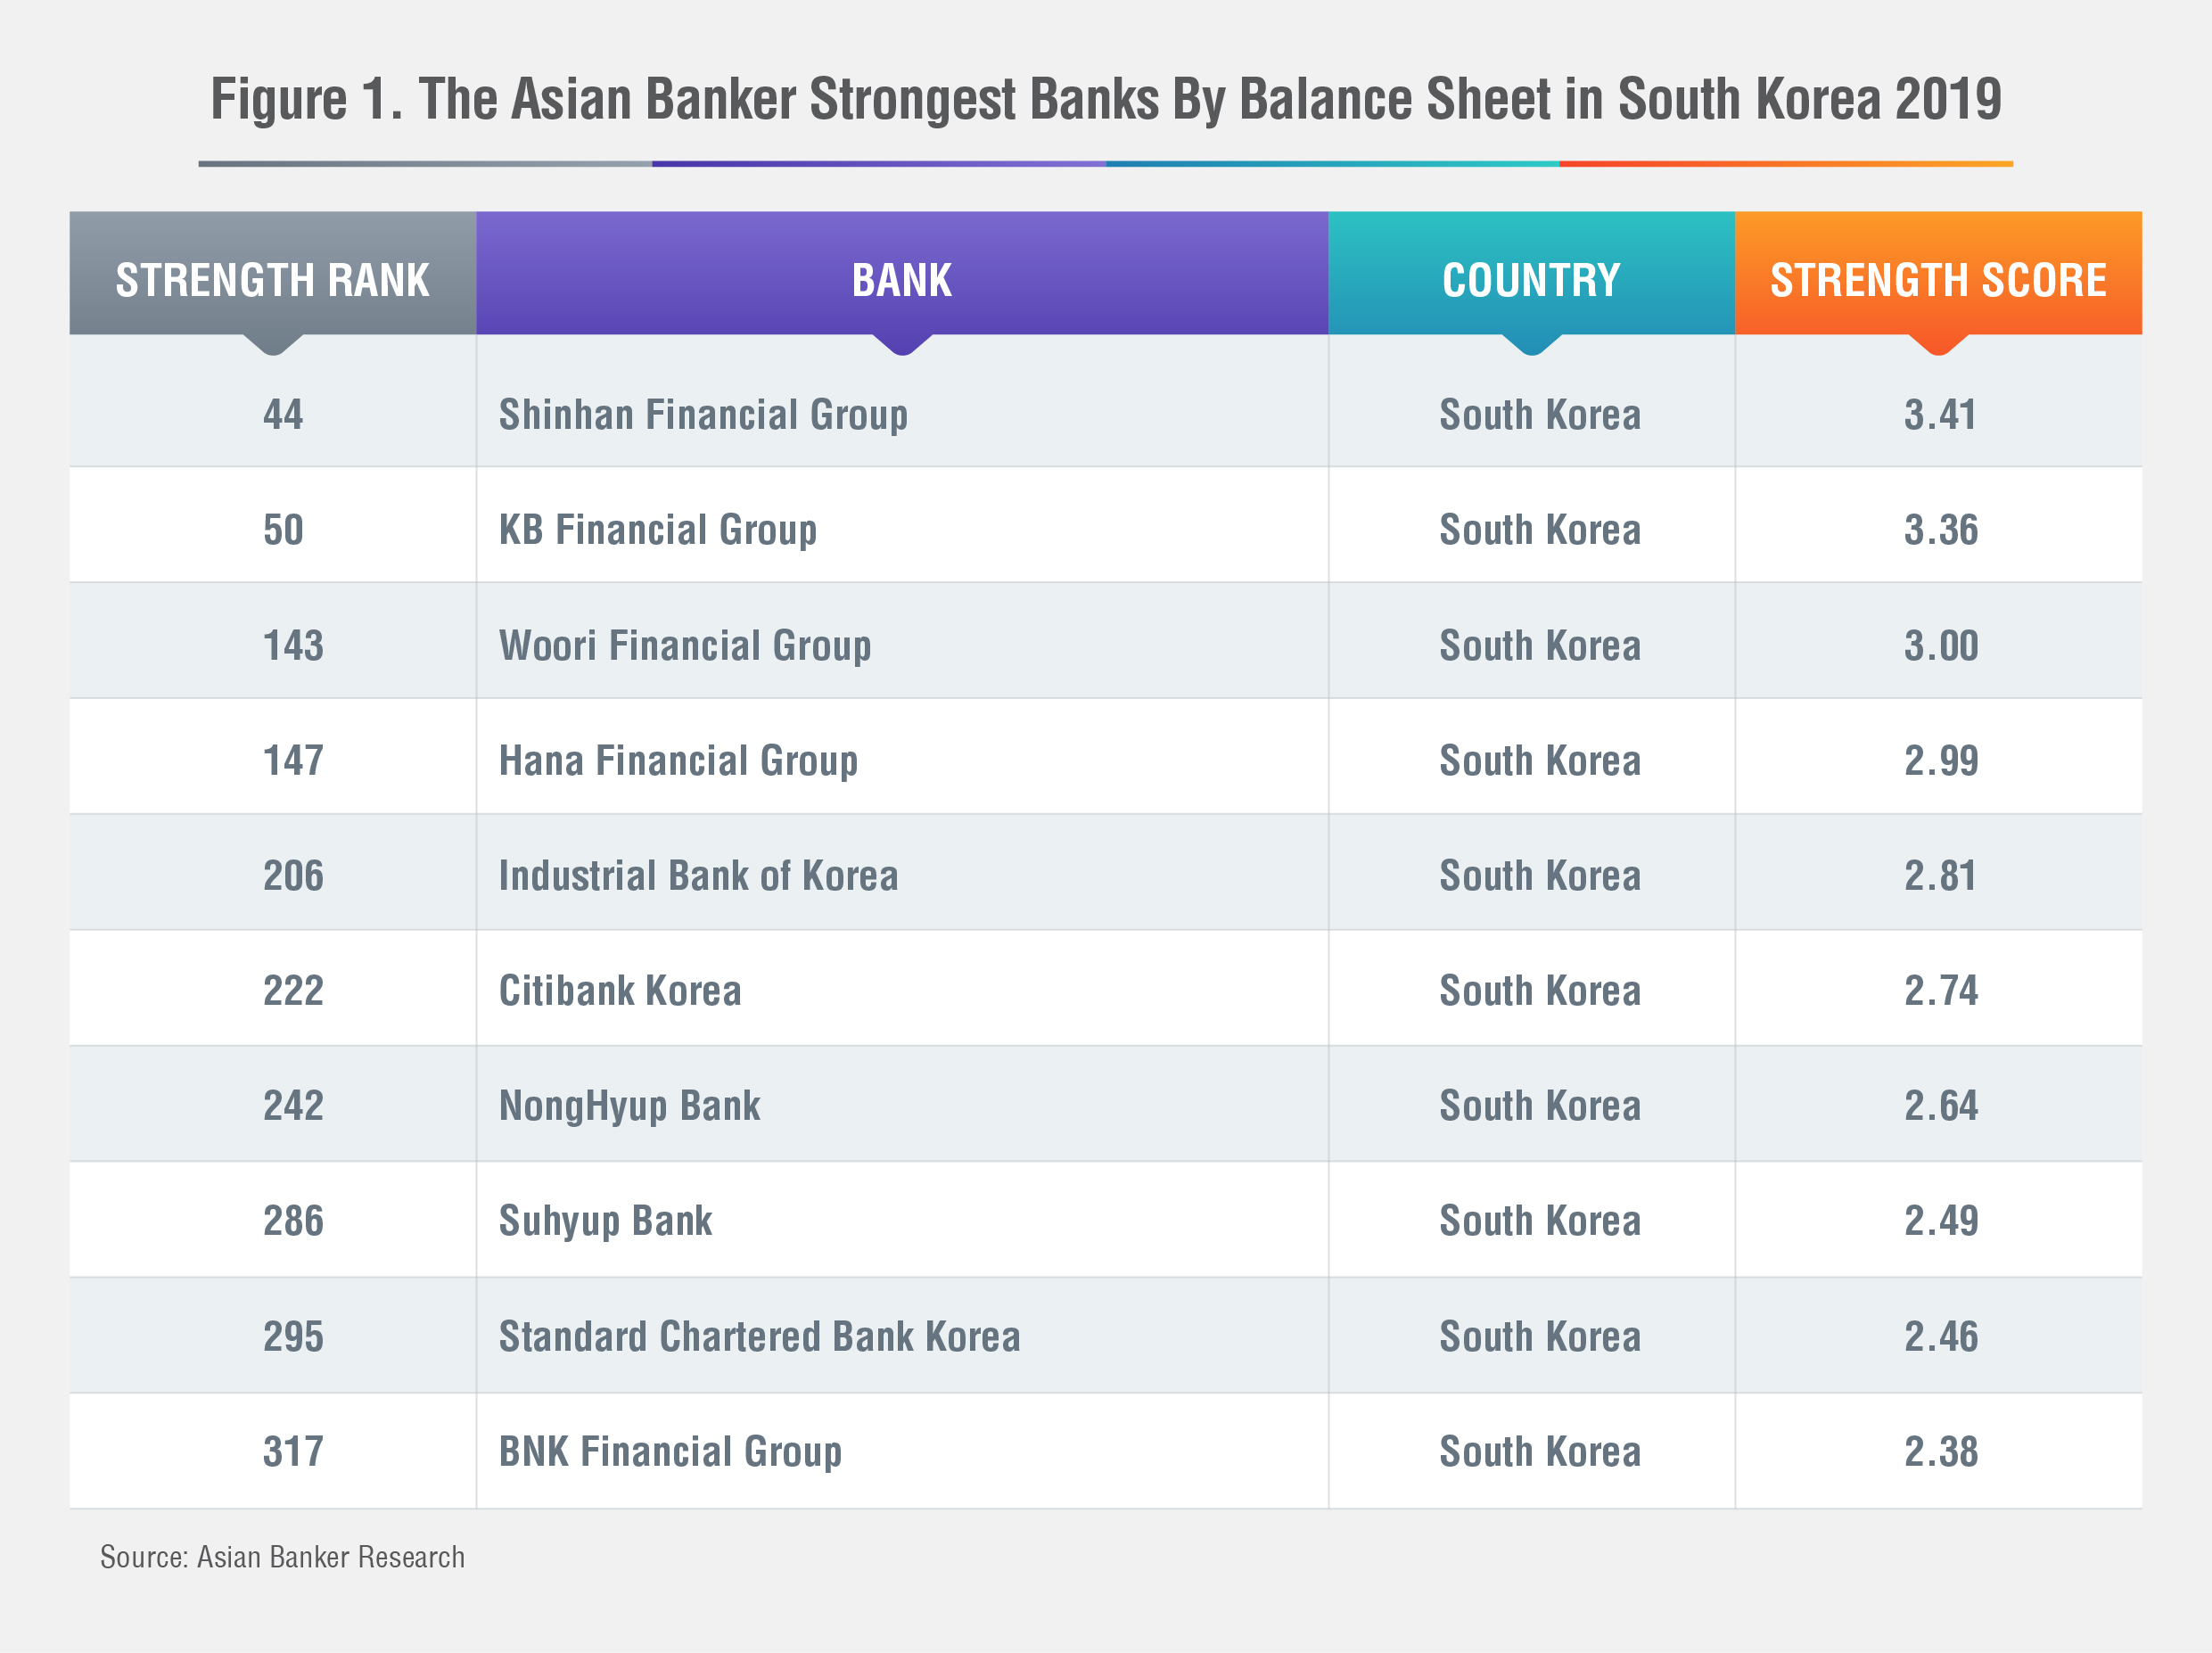 Shinhan Financial Group Is The Strongest Bank In South Korea For